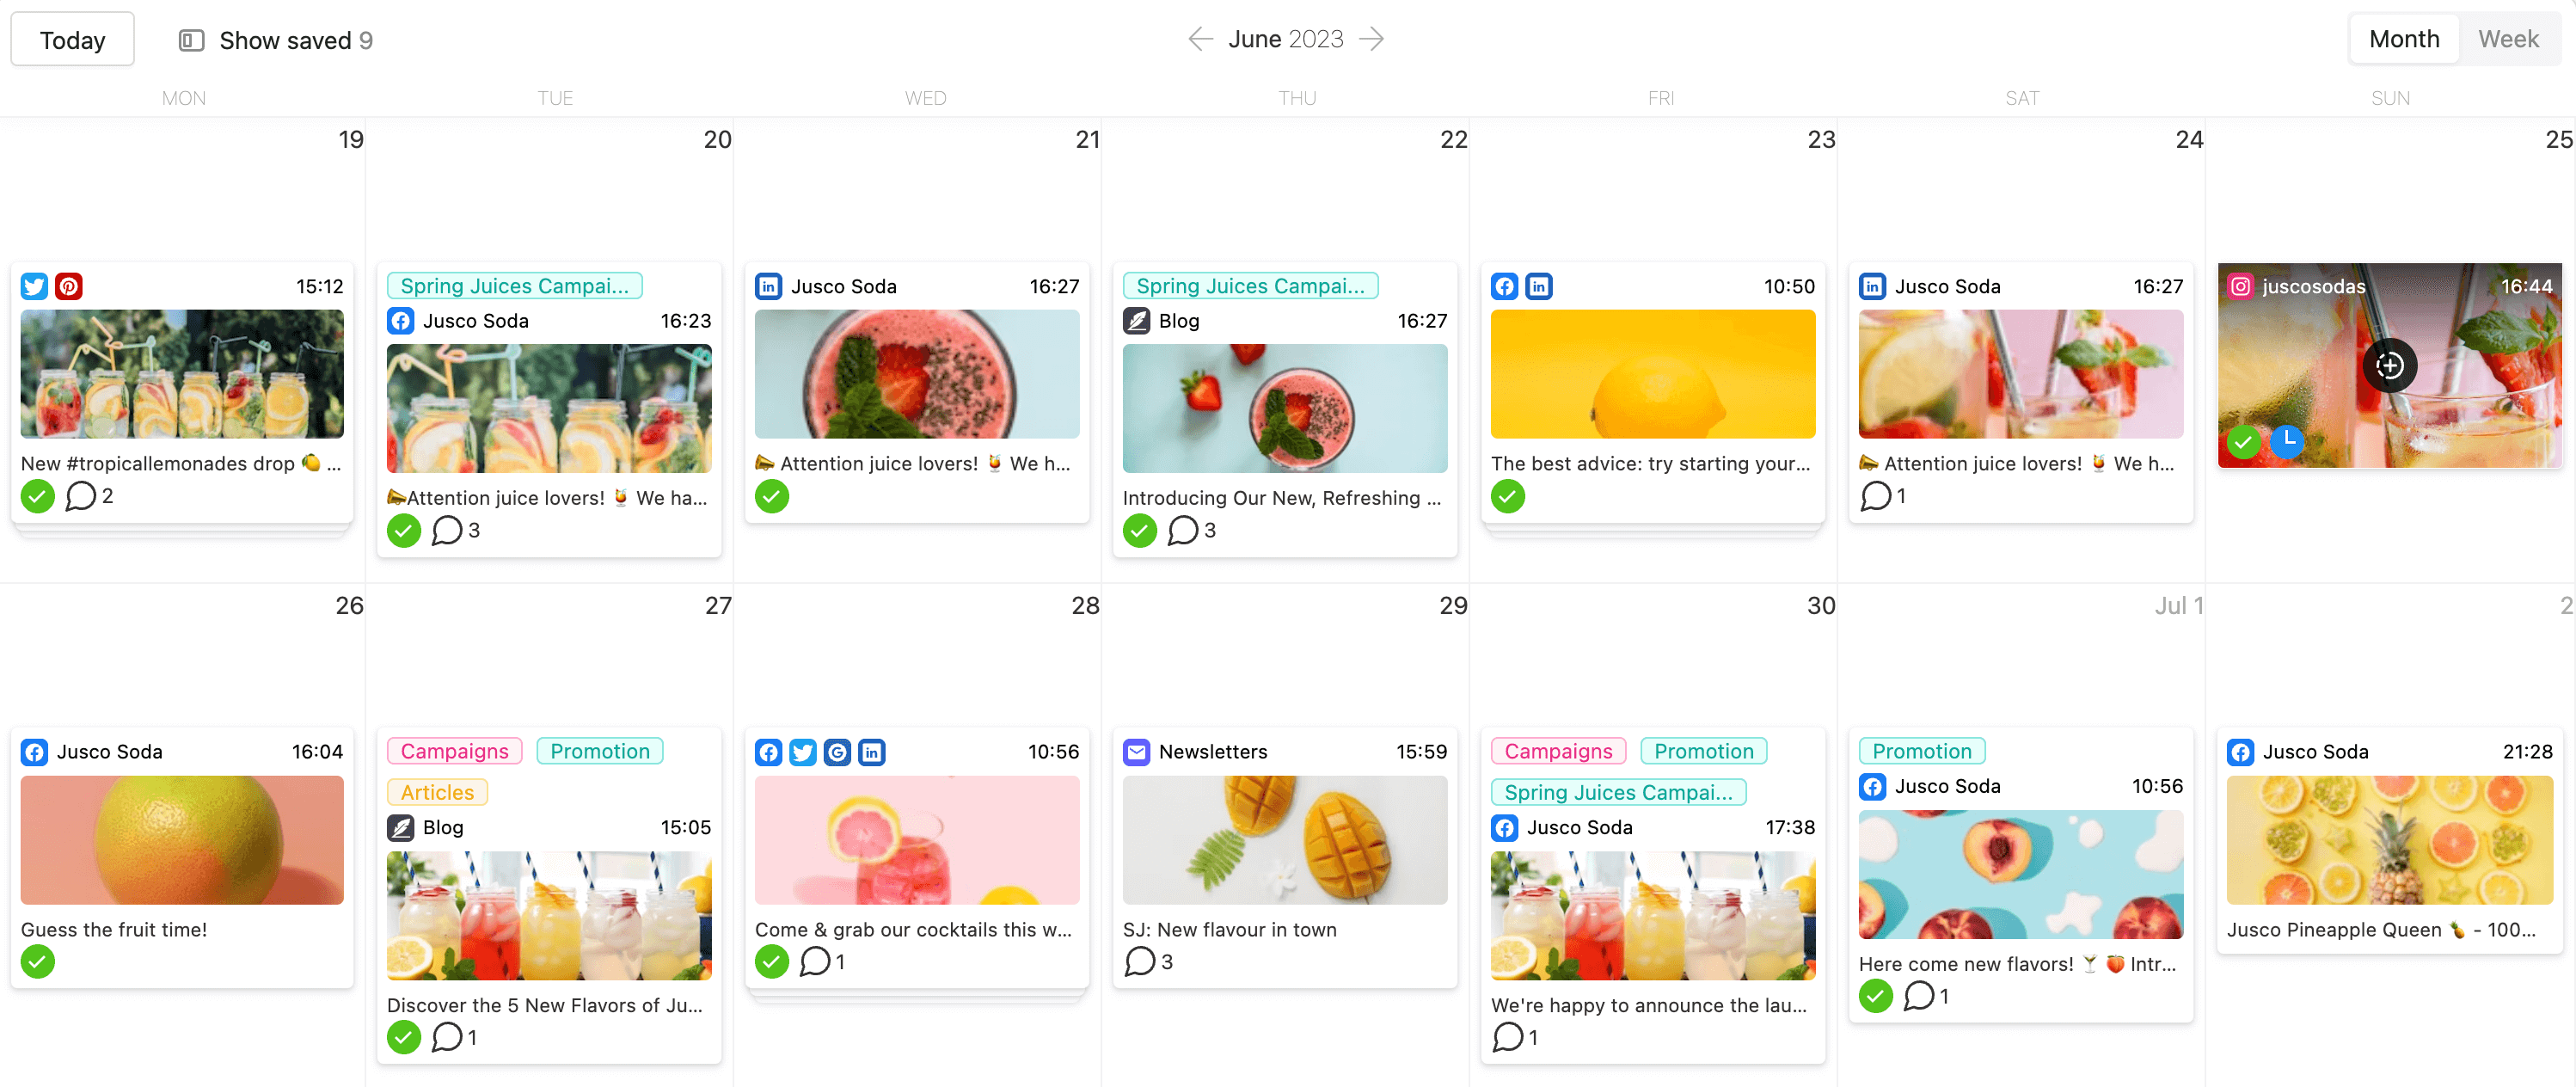 Content calendar with collaborative features such as approval checkmarks and comments.